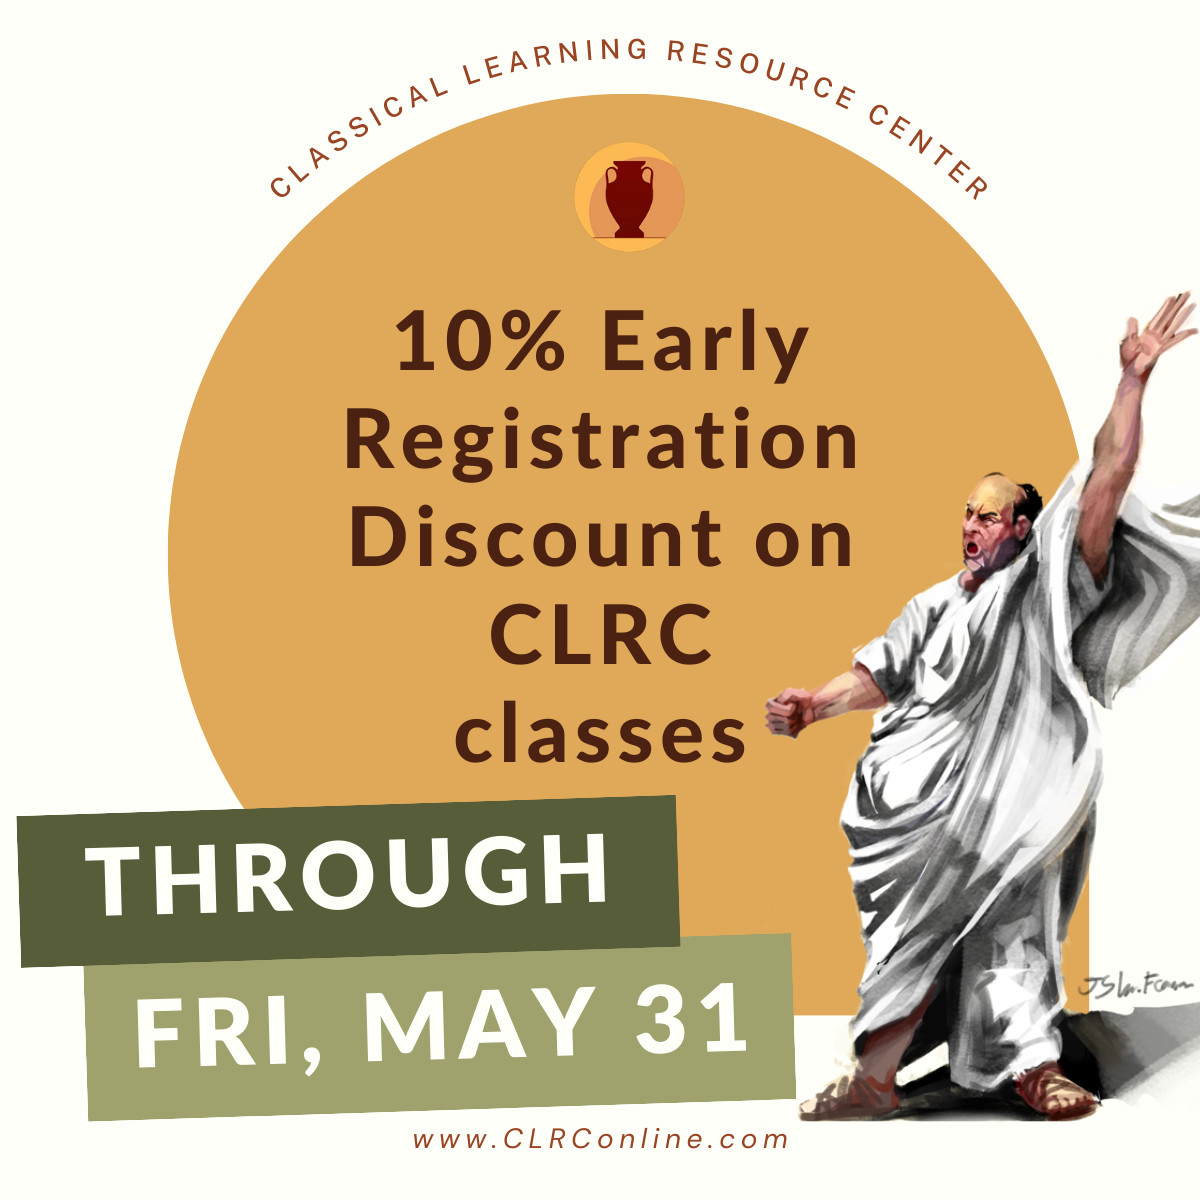 Don't miss our 10% Early Registration Discount through May 31! Browse our full course catalog at bit.ly/3Vcf14A.

#onlineclasses #discountonlineclasses